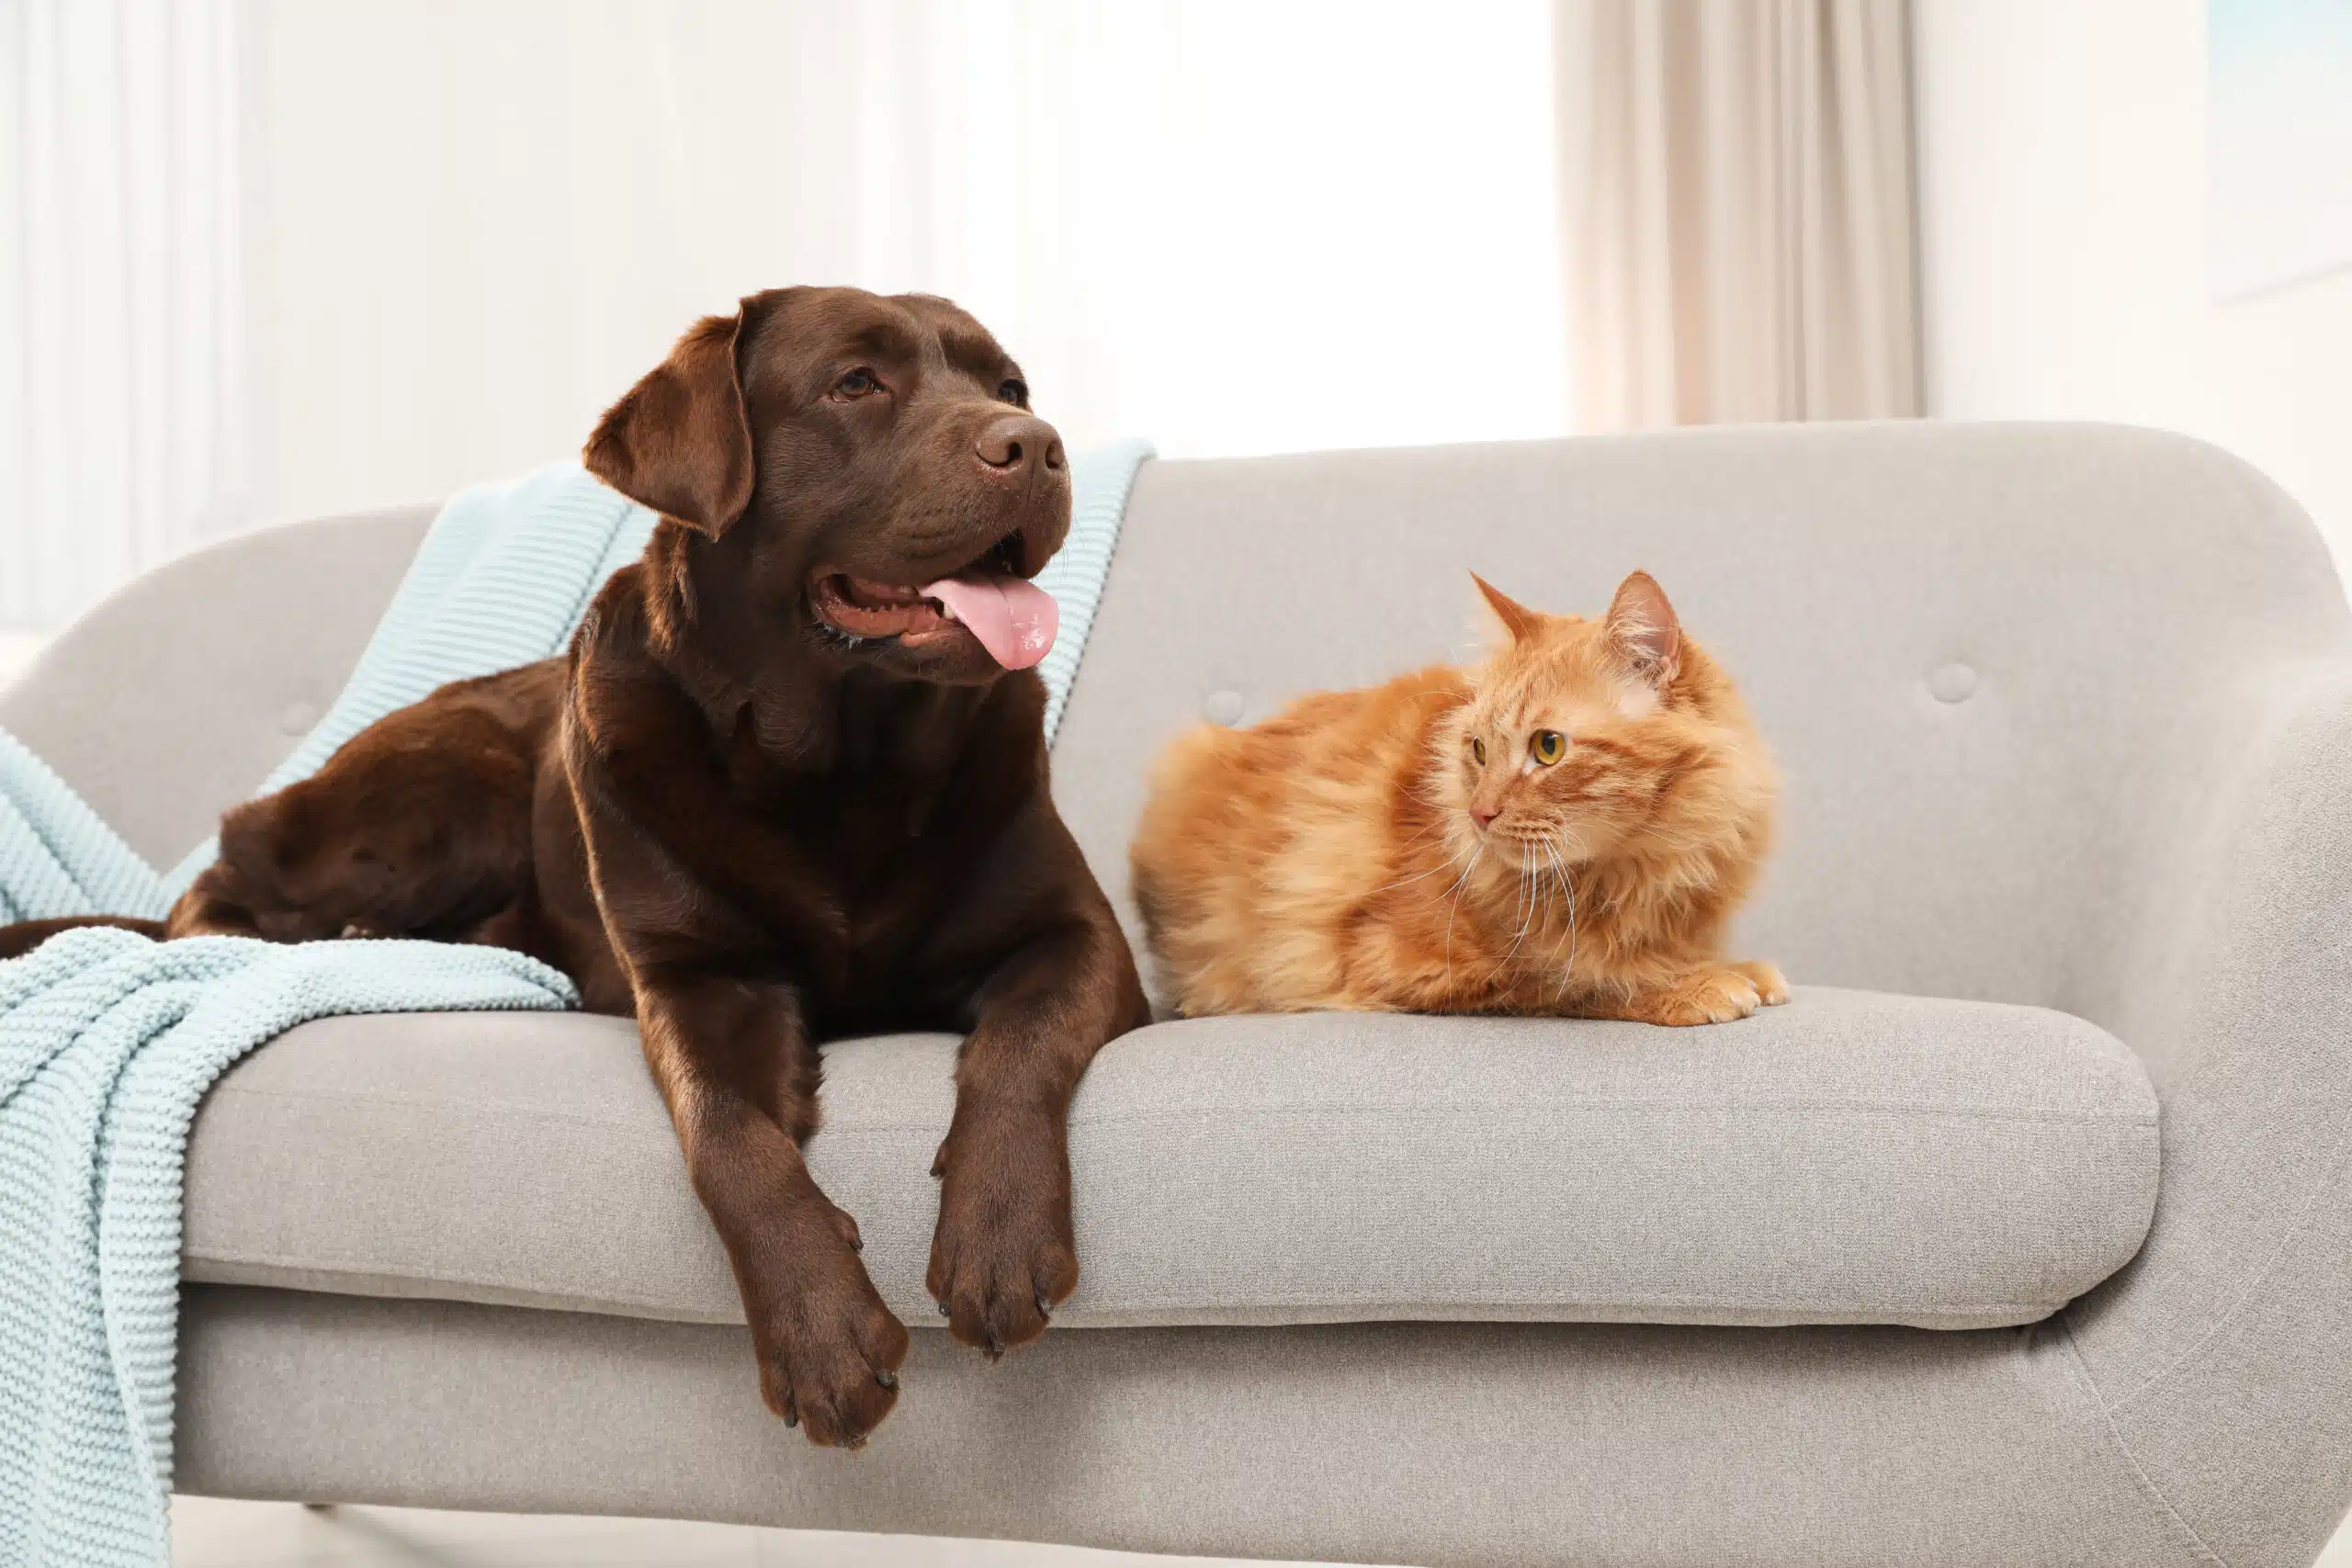 Pet-proofing your home is definitely needed if your shedding pet likes lounging around on furniture like this dog and cat who need training.